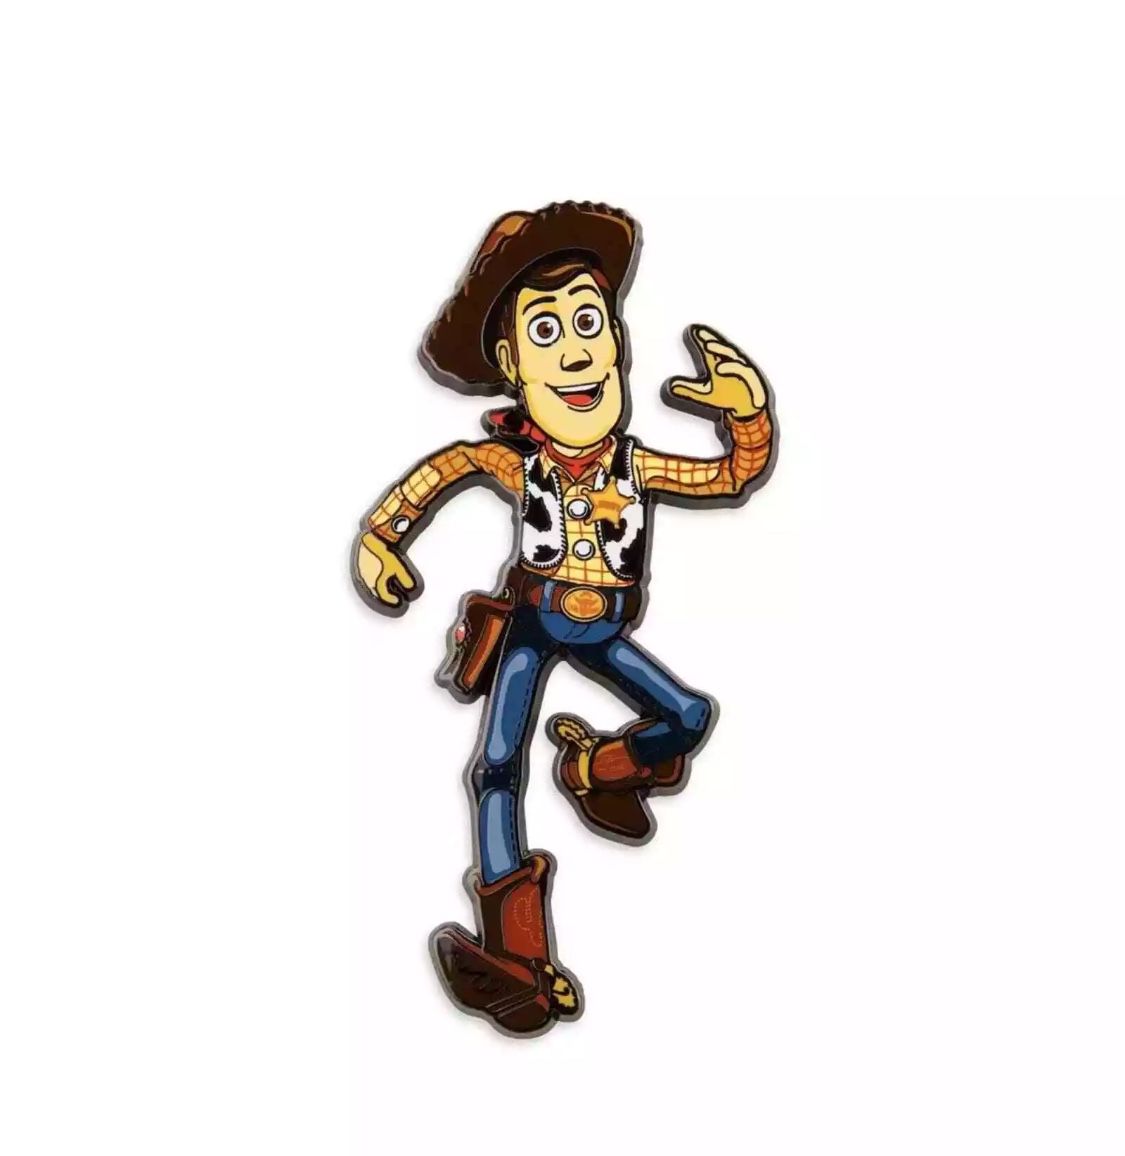 Disney FiGPiN Woody #890 Toy Story Parks Exclusive Collectible Toys